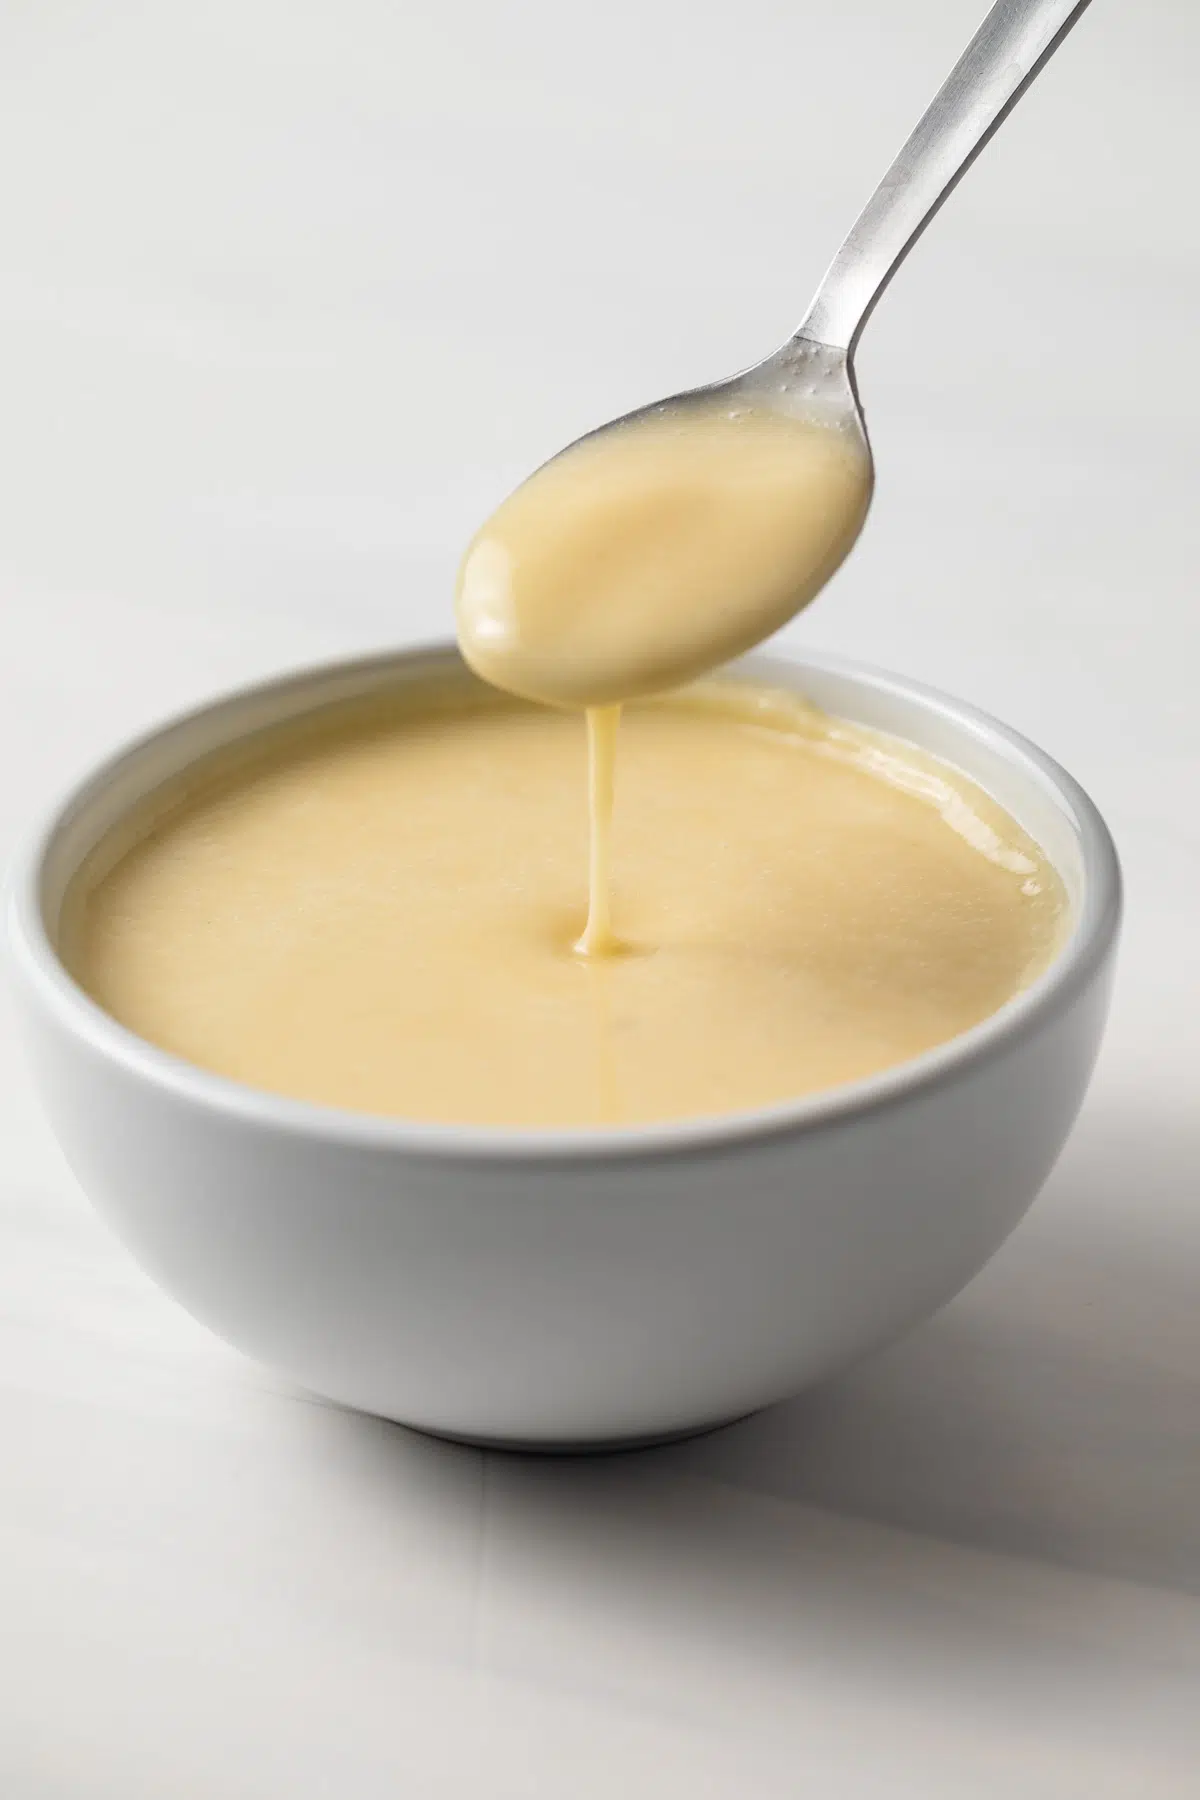 Beurre blanc sauce in white bowl with spoon.